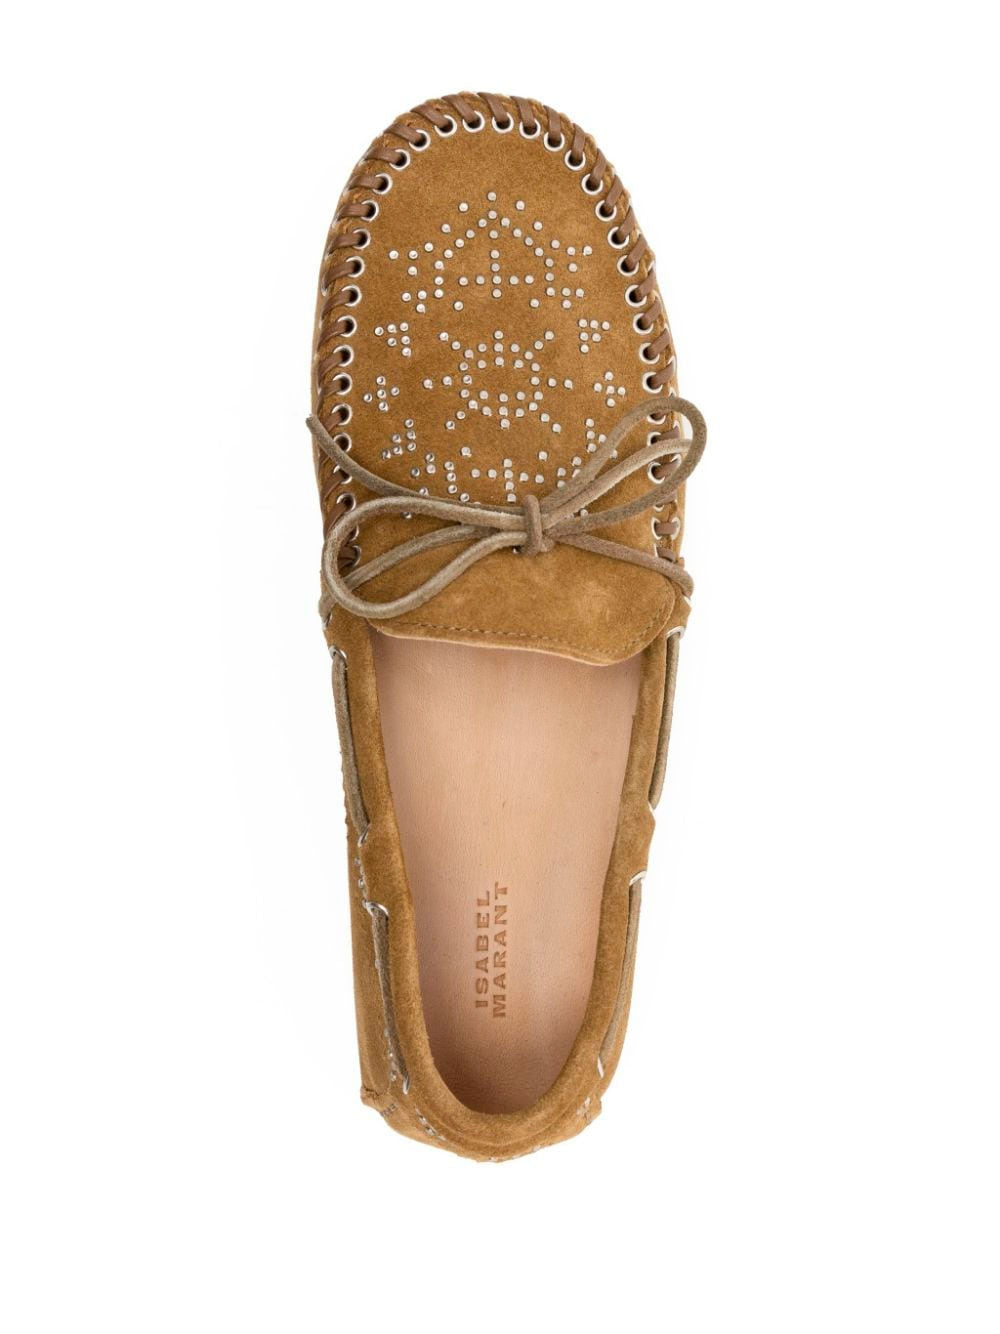 Isabel Marant brown leather loafers.